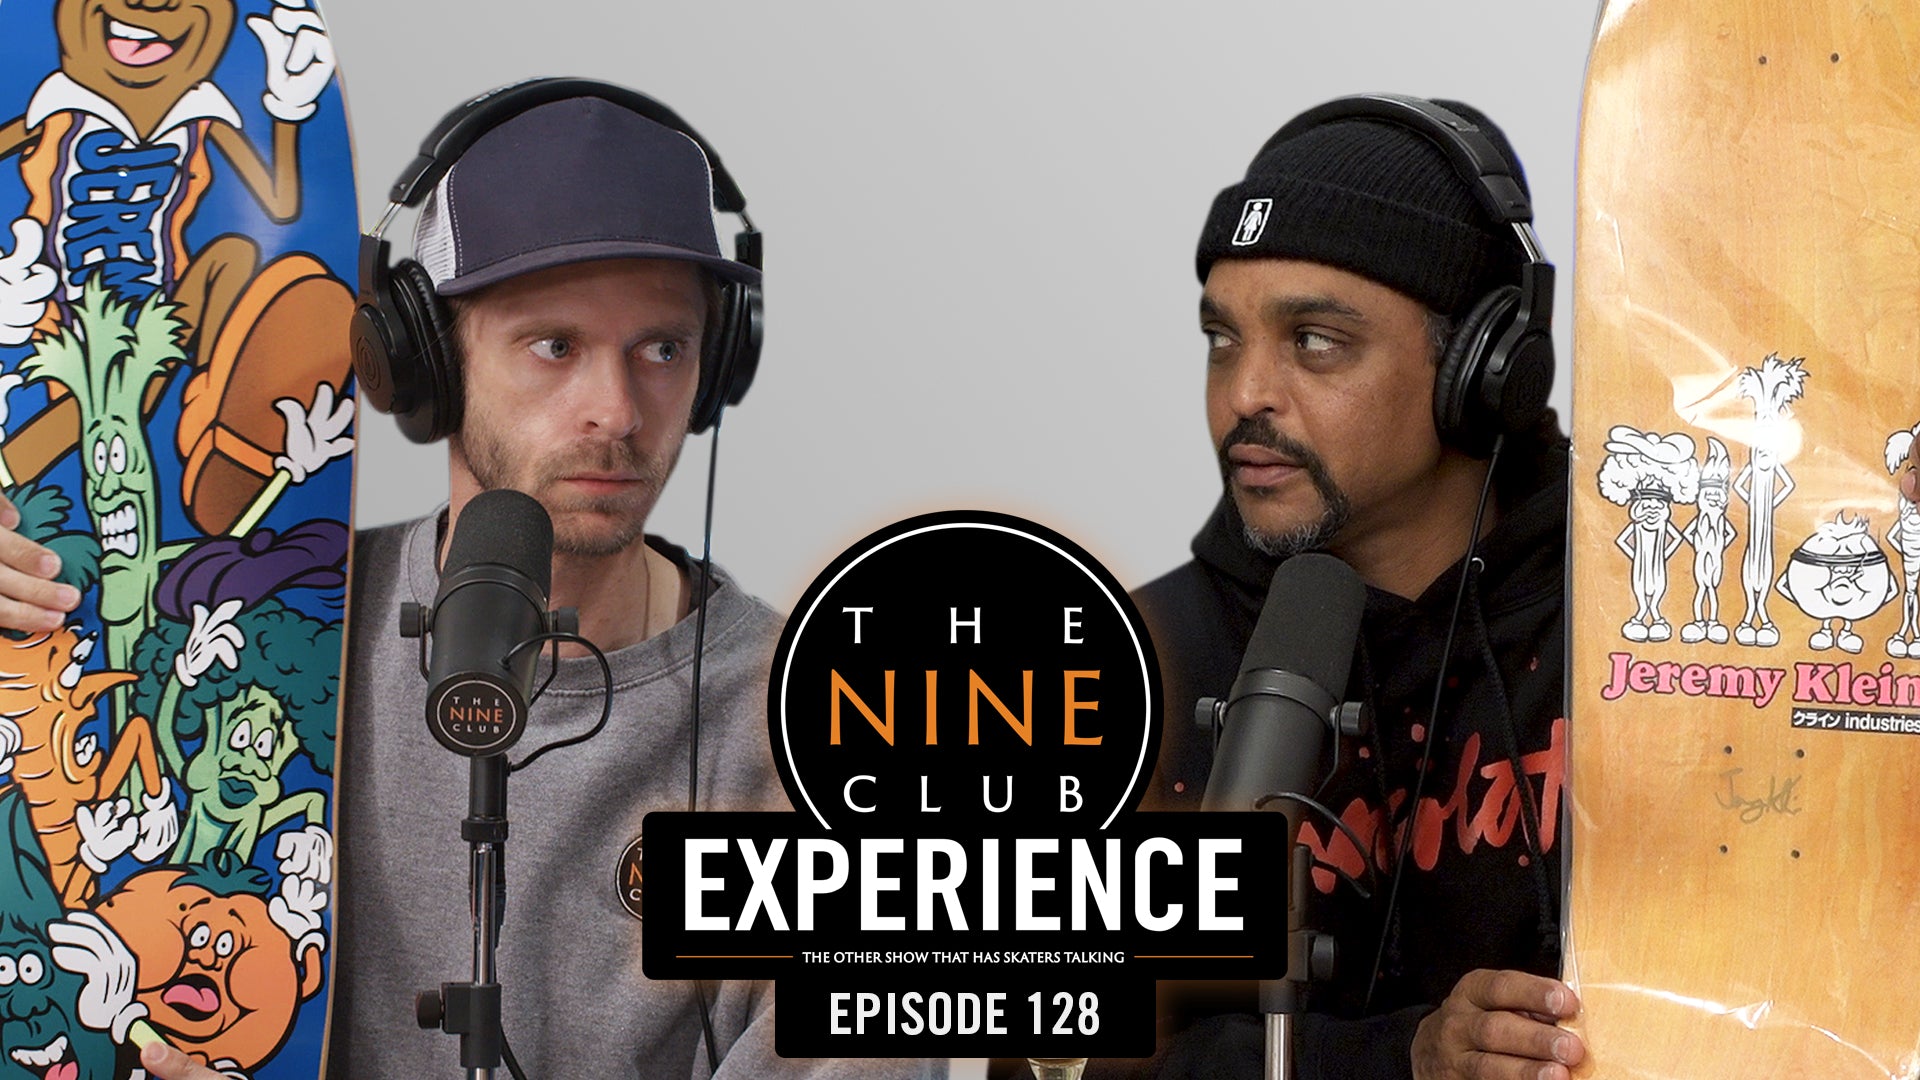 The Nine Club Experience Episode 128